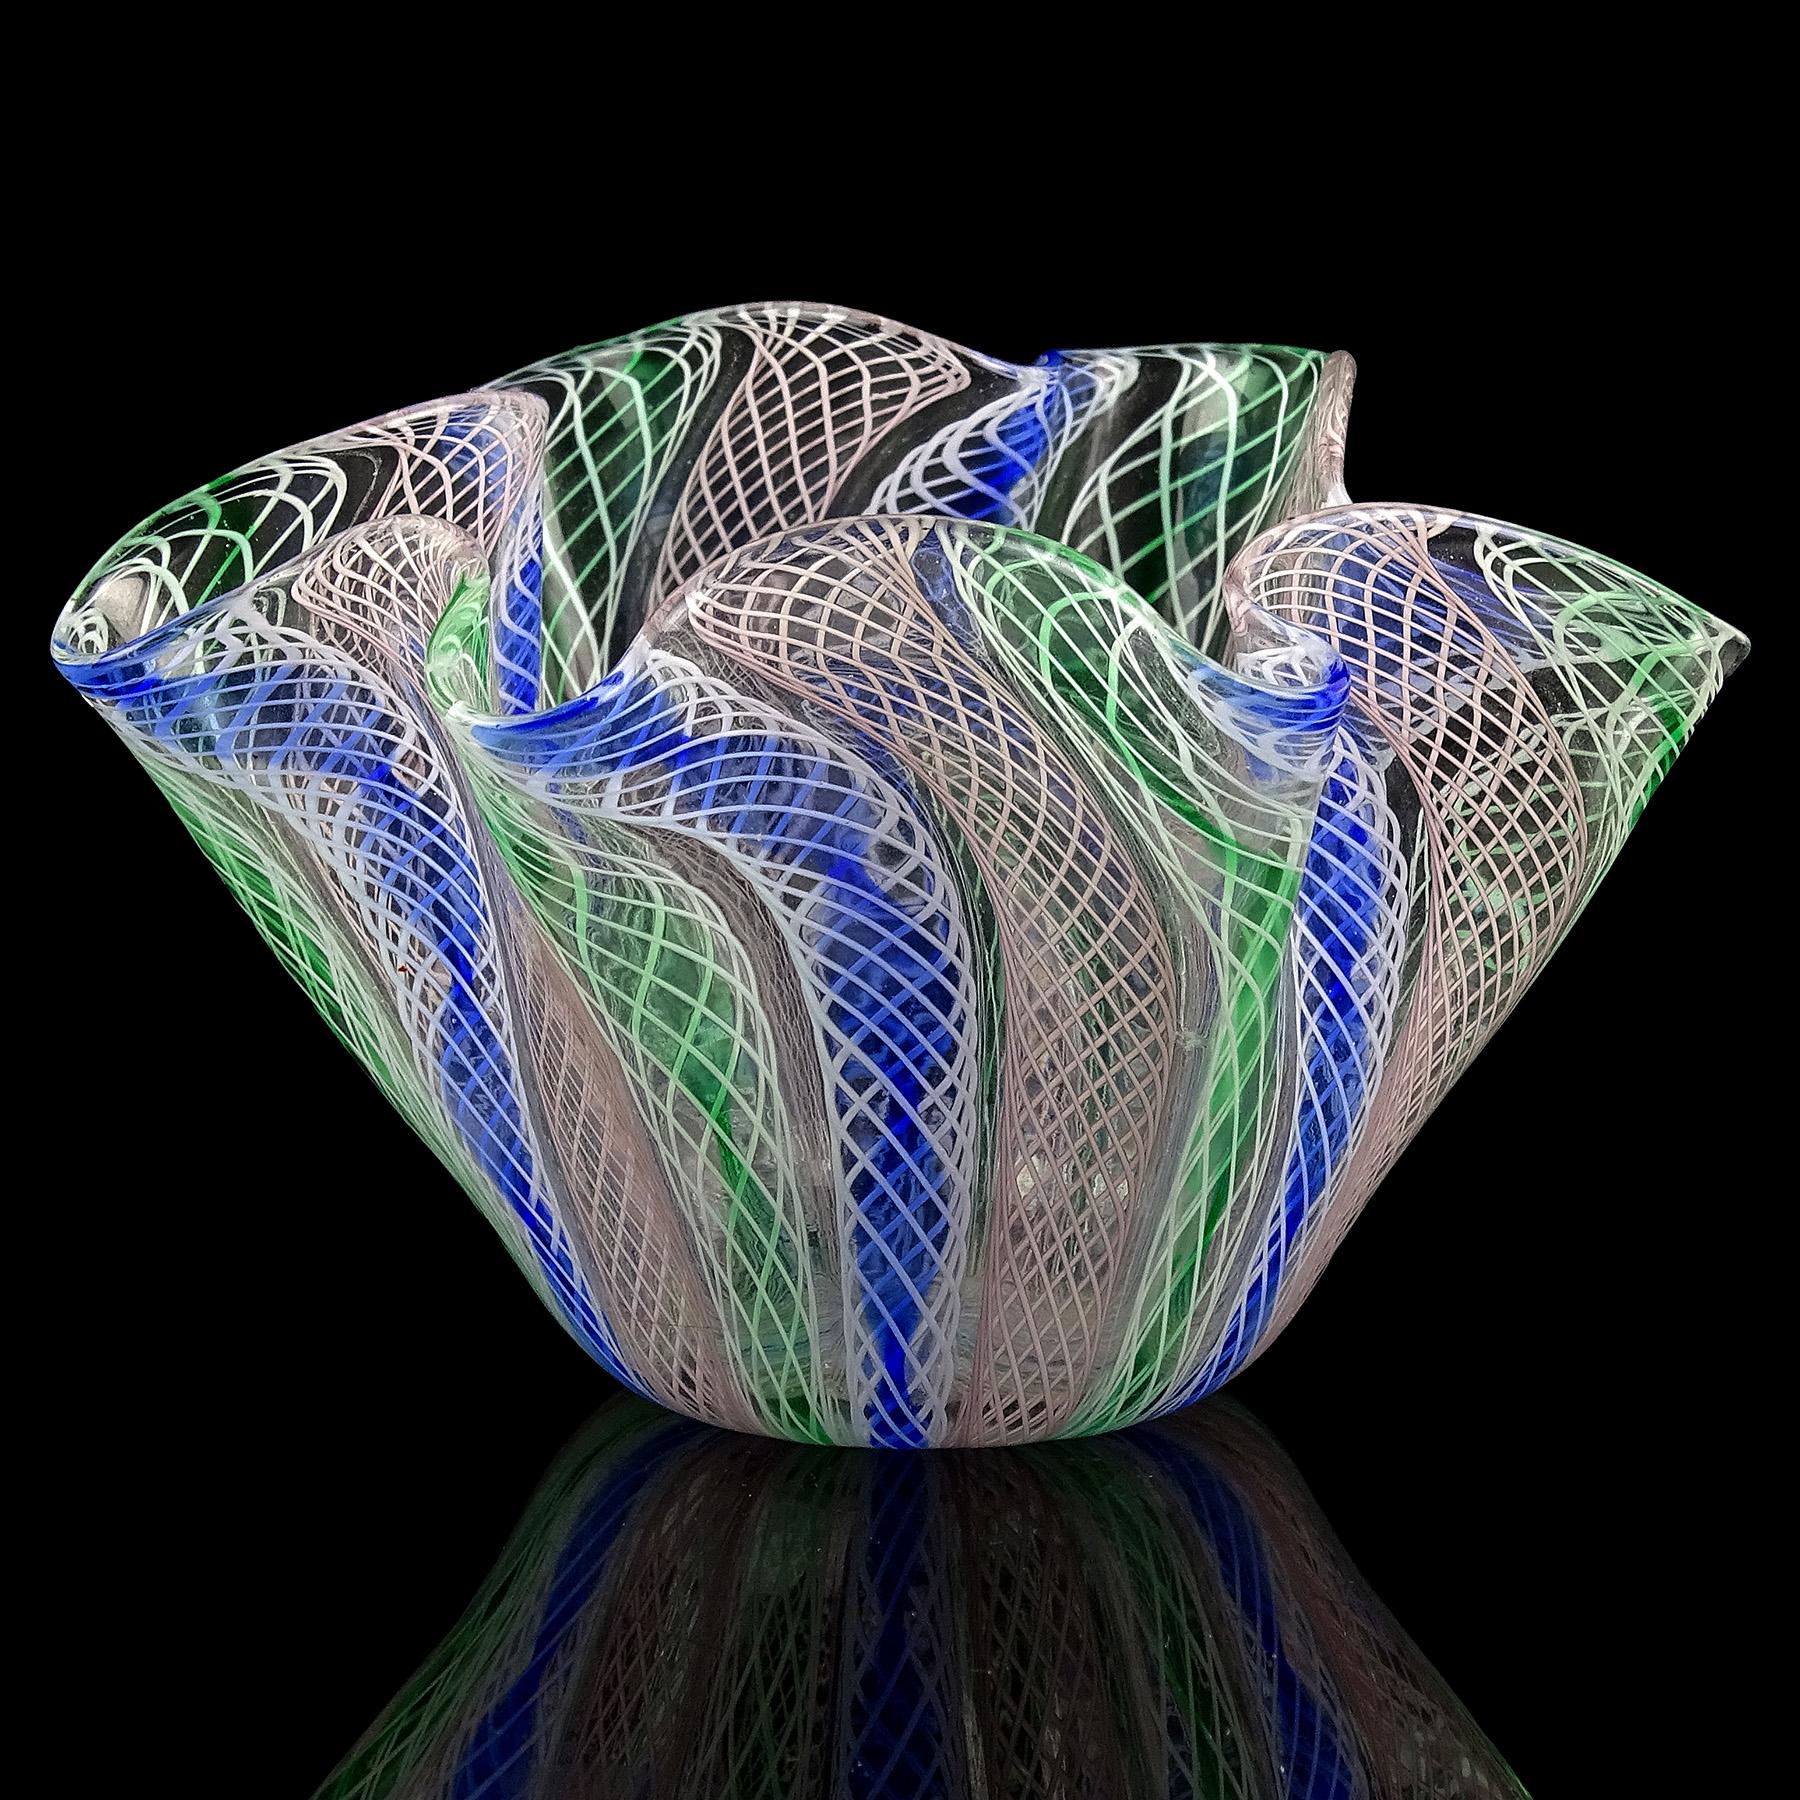 Beautiful vintage Murano hand blown pink, blue, green and white ribbons Italian art glass handkerchief / fazzoletto vase. Created in the manner of the Venini and Fratelli Toso companies. This is a small sample, made with intricate alternating